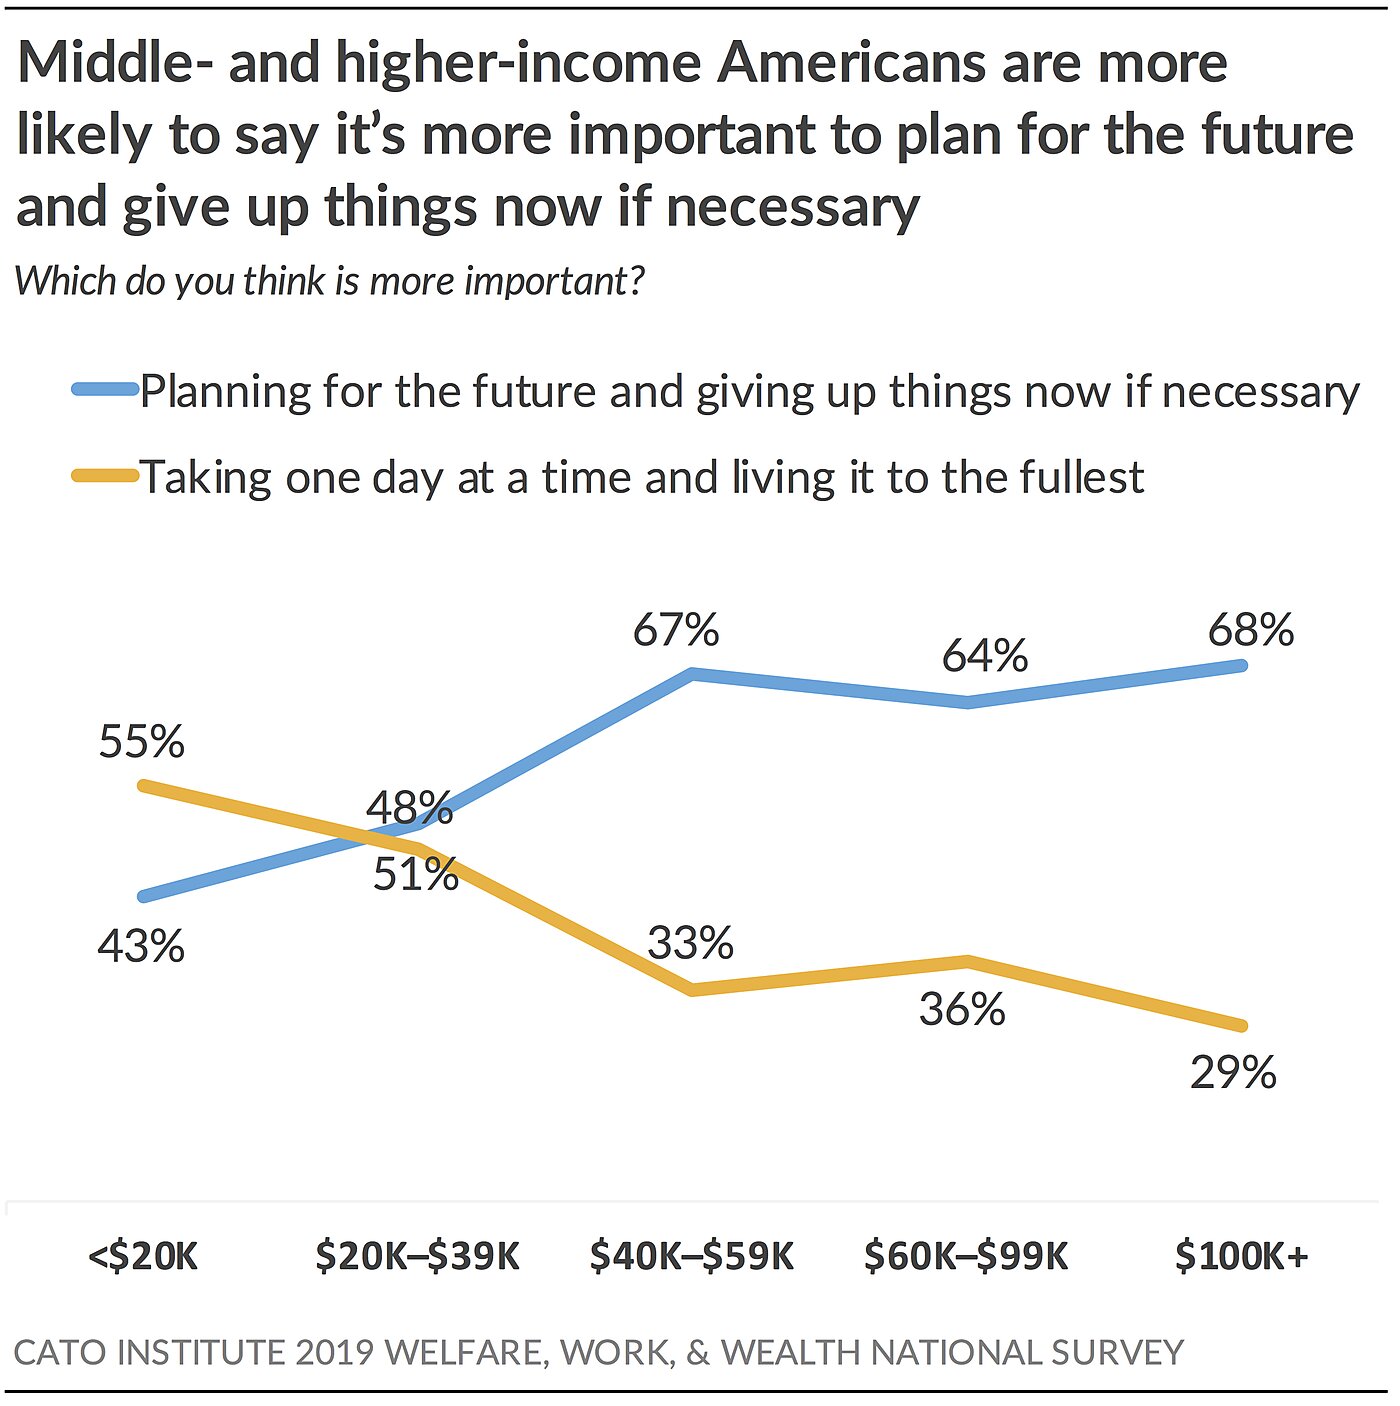 Middle- and higher-income Americans are more likely to say it's more important to plan for the future and give up things now if necessary